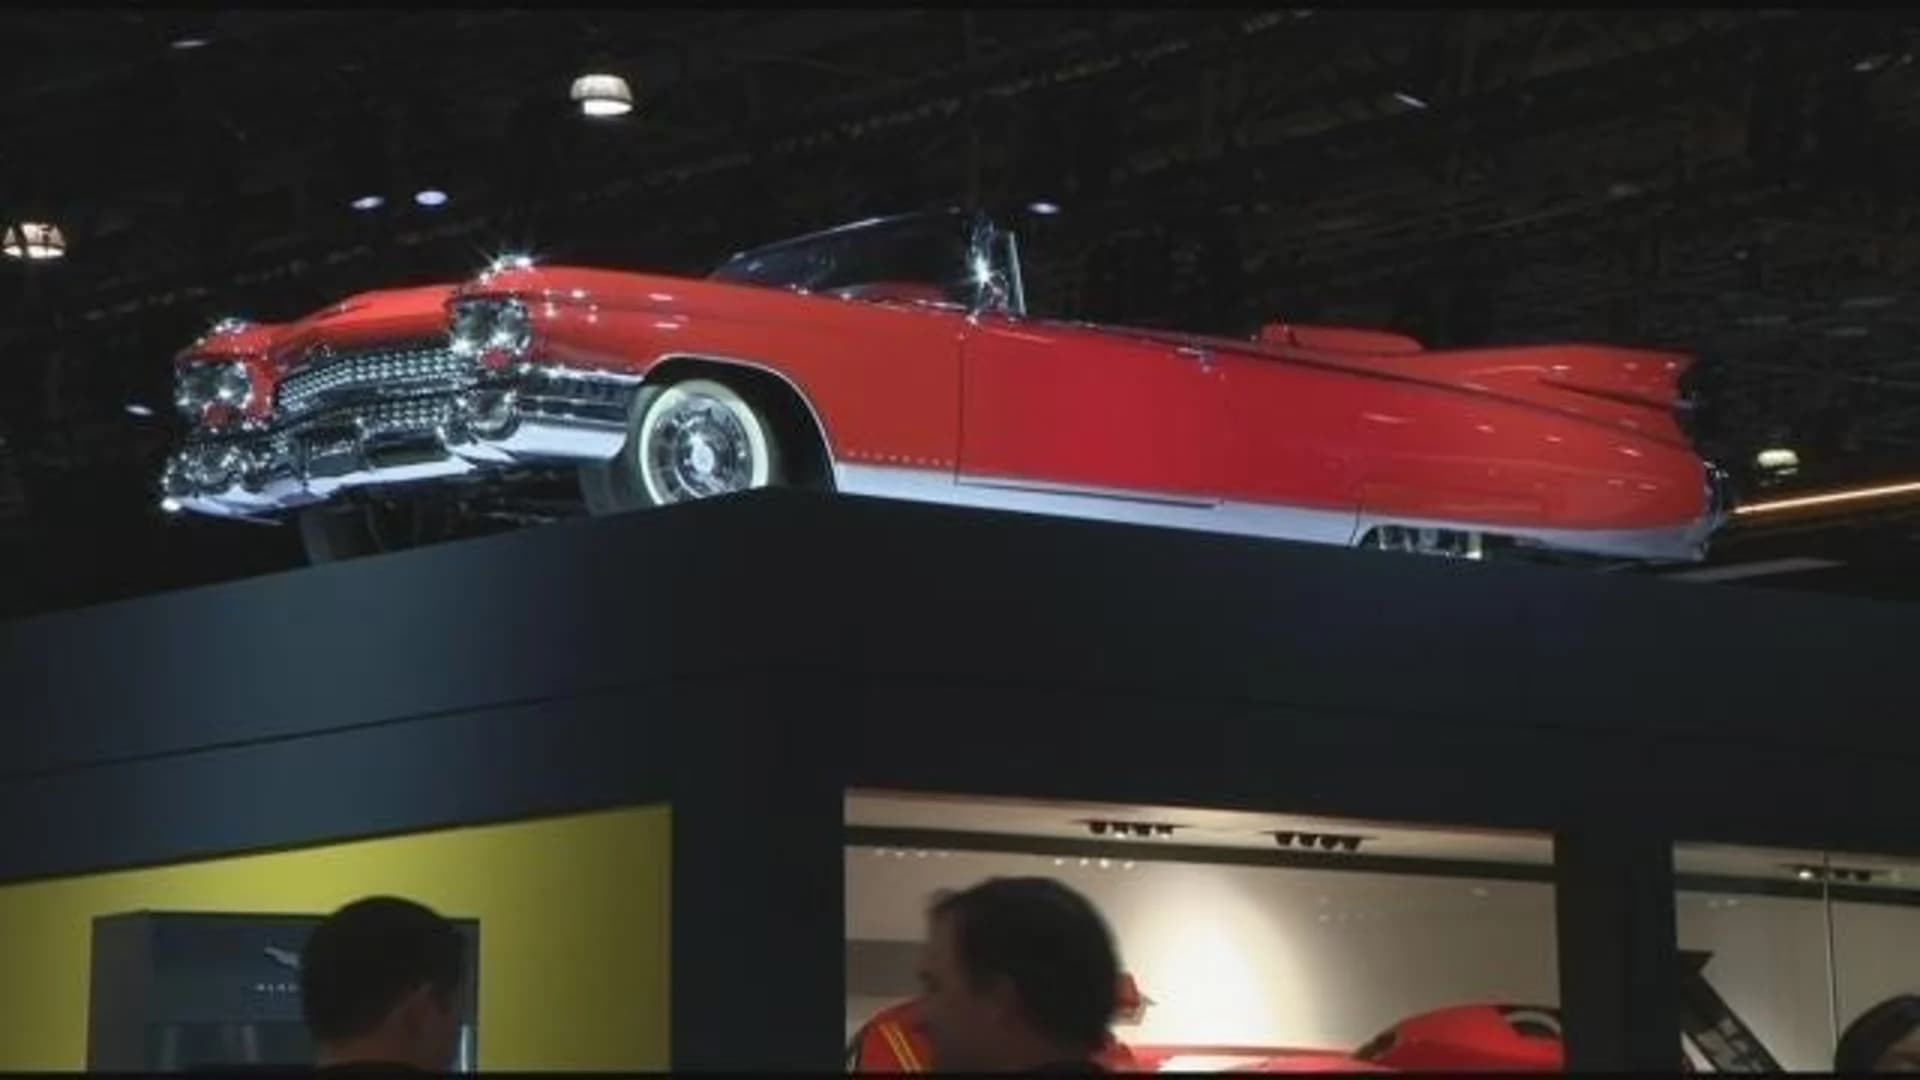 News 12 gets a sneak peek at this year's NY International Auto Show